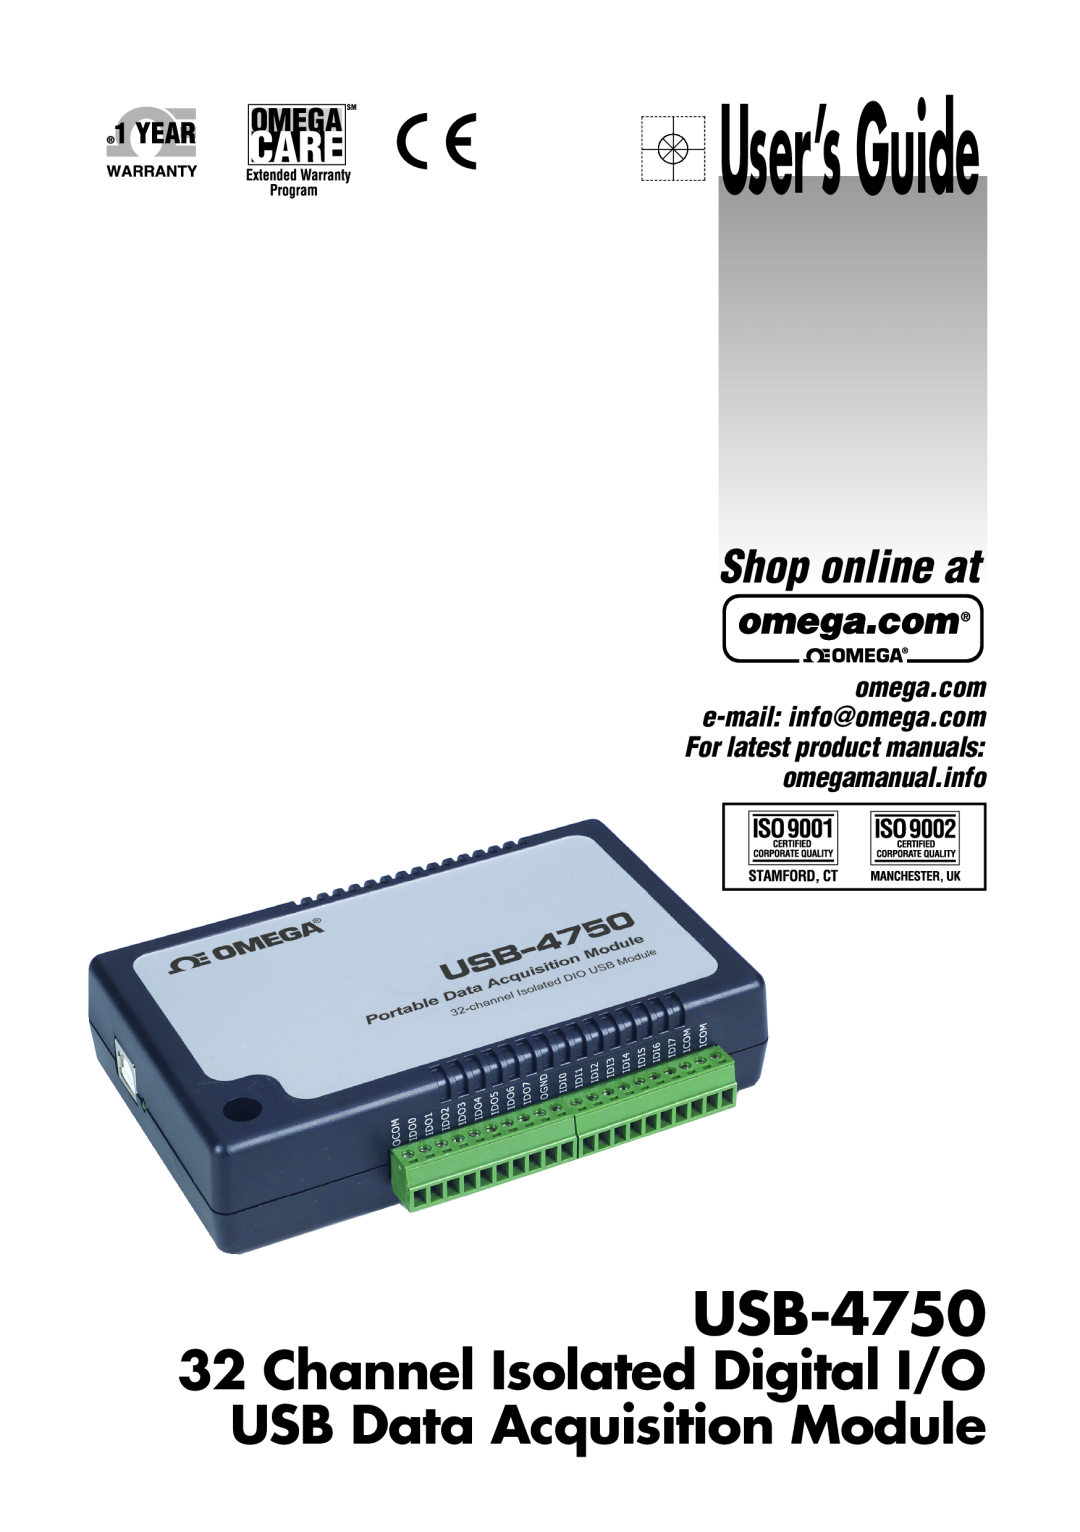 Omega USB-4750 manual User’s Guide, Channel Isolated Digital I/O USB Data Acquisition Module, Shop online at 